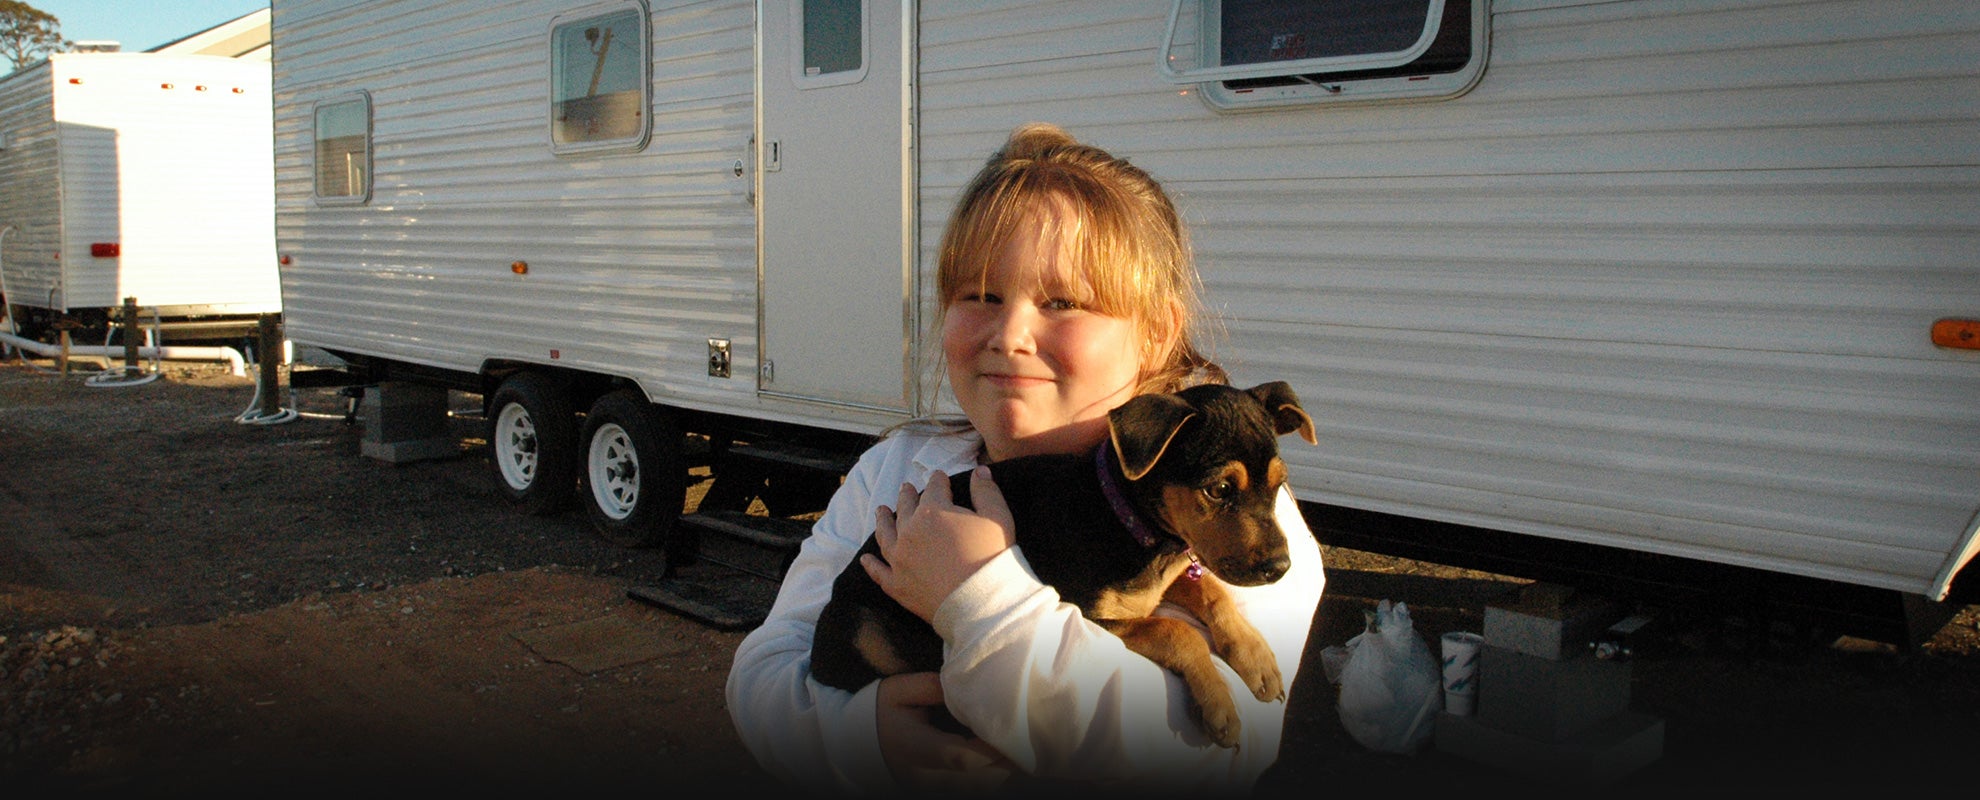 Brianna Edson, a Mississippi resident, and her new dog Dixie in front of the travel trailer serving as their temporary home along with Brianna's mother Wendy (not pictured) at the Ingalls-Wright Emergency Group Site, in November 2005.